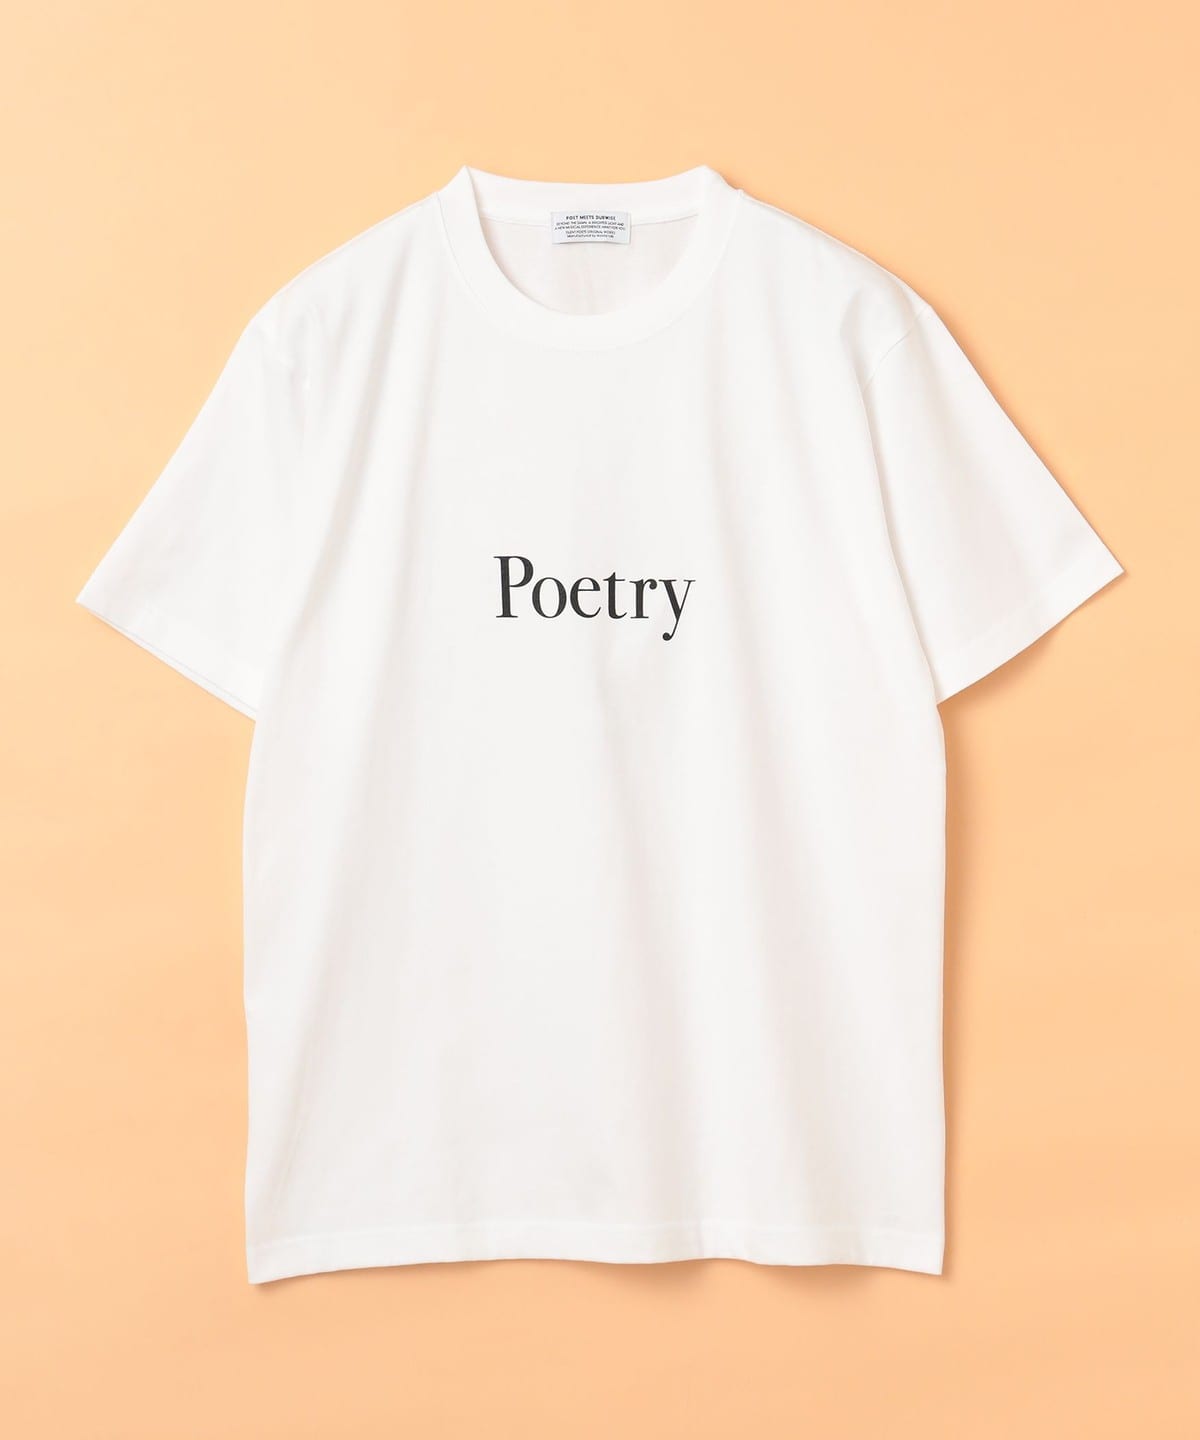 BEAMS LIGHTS（ビームス ライツ）POET MEETS DUBWISE / “POETRY” T ...